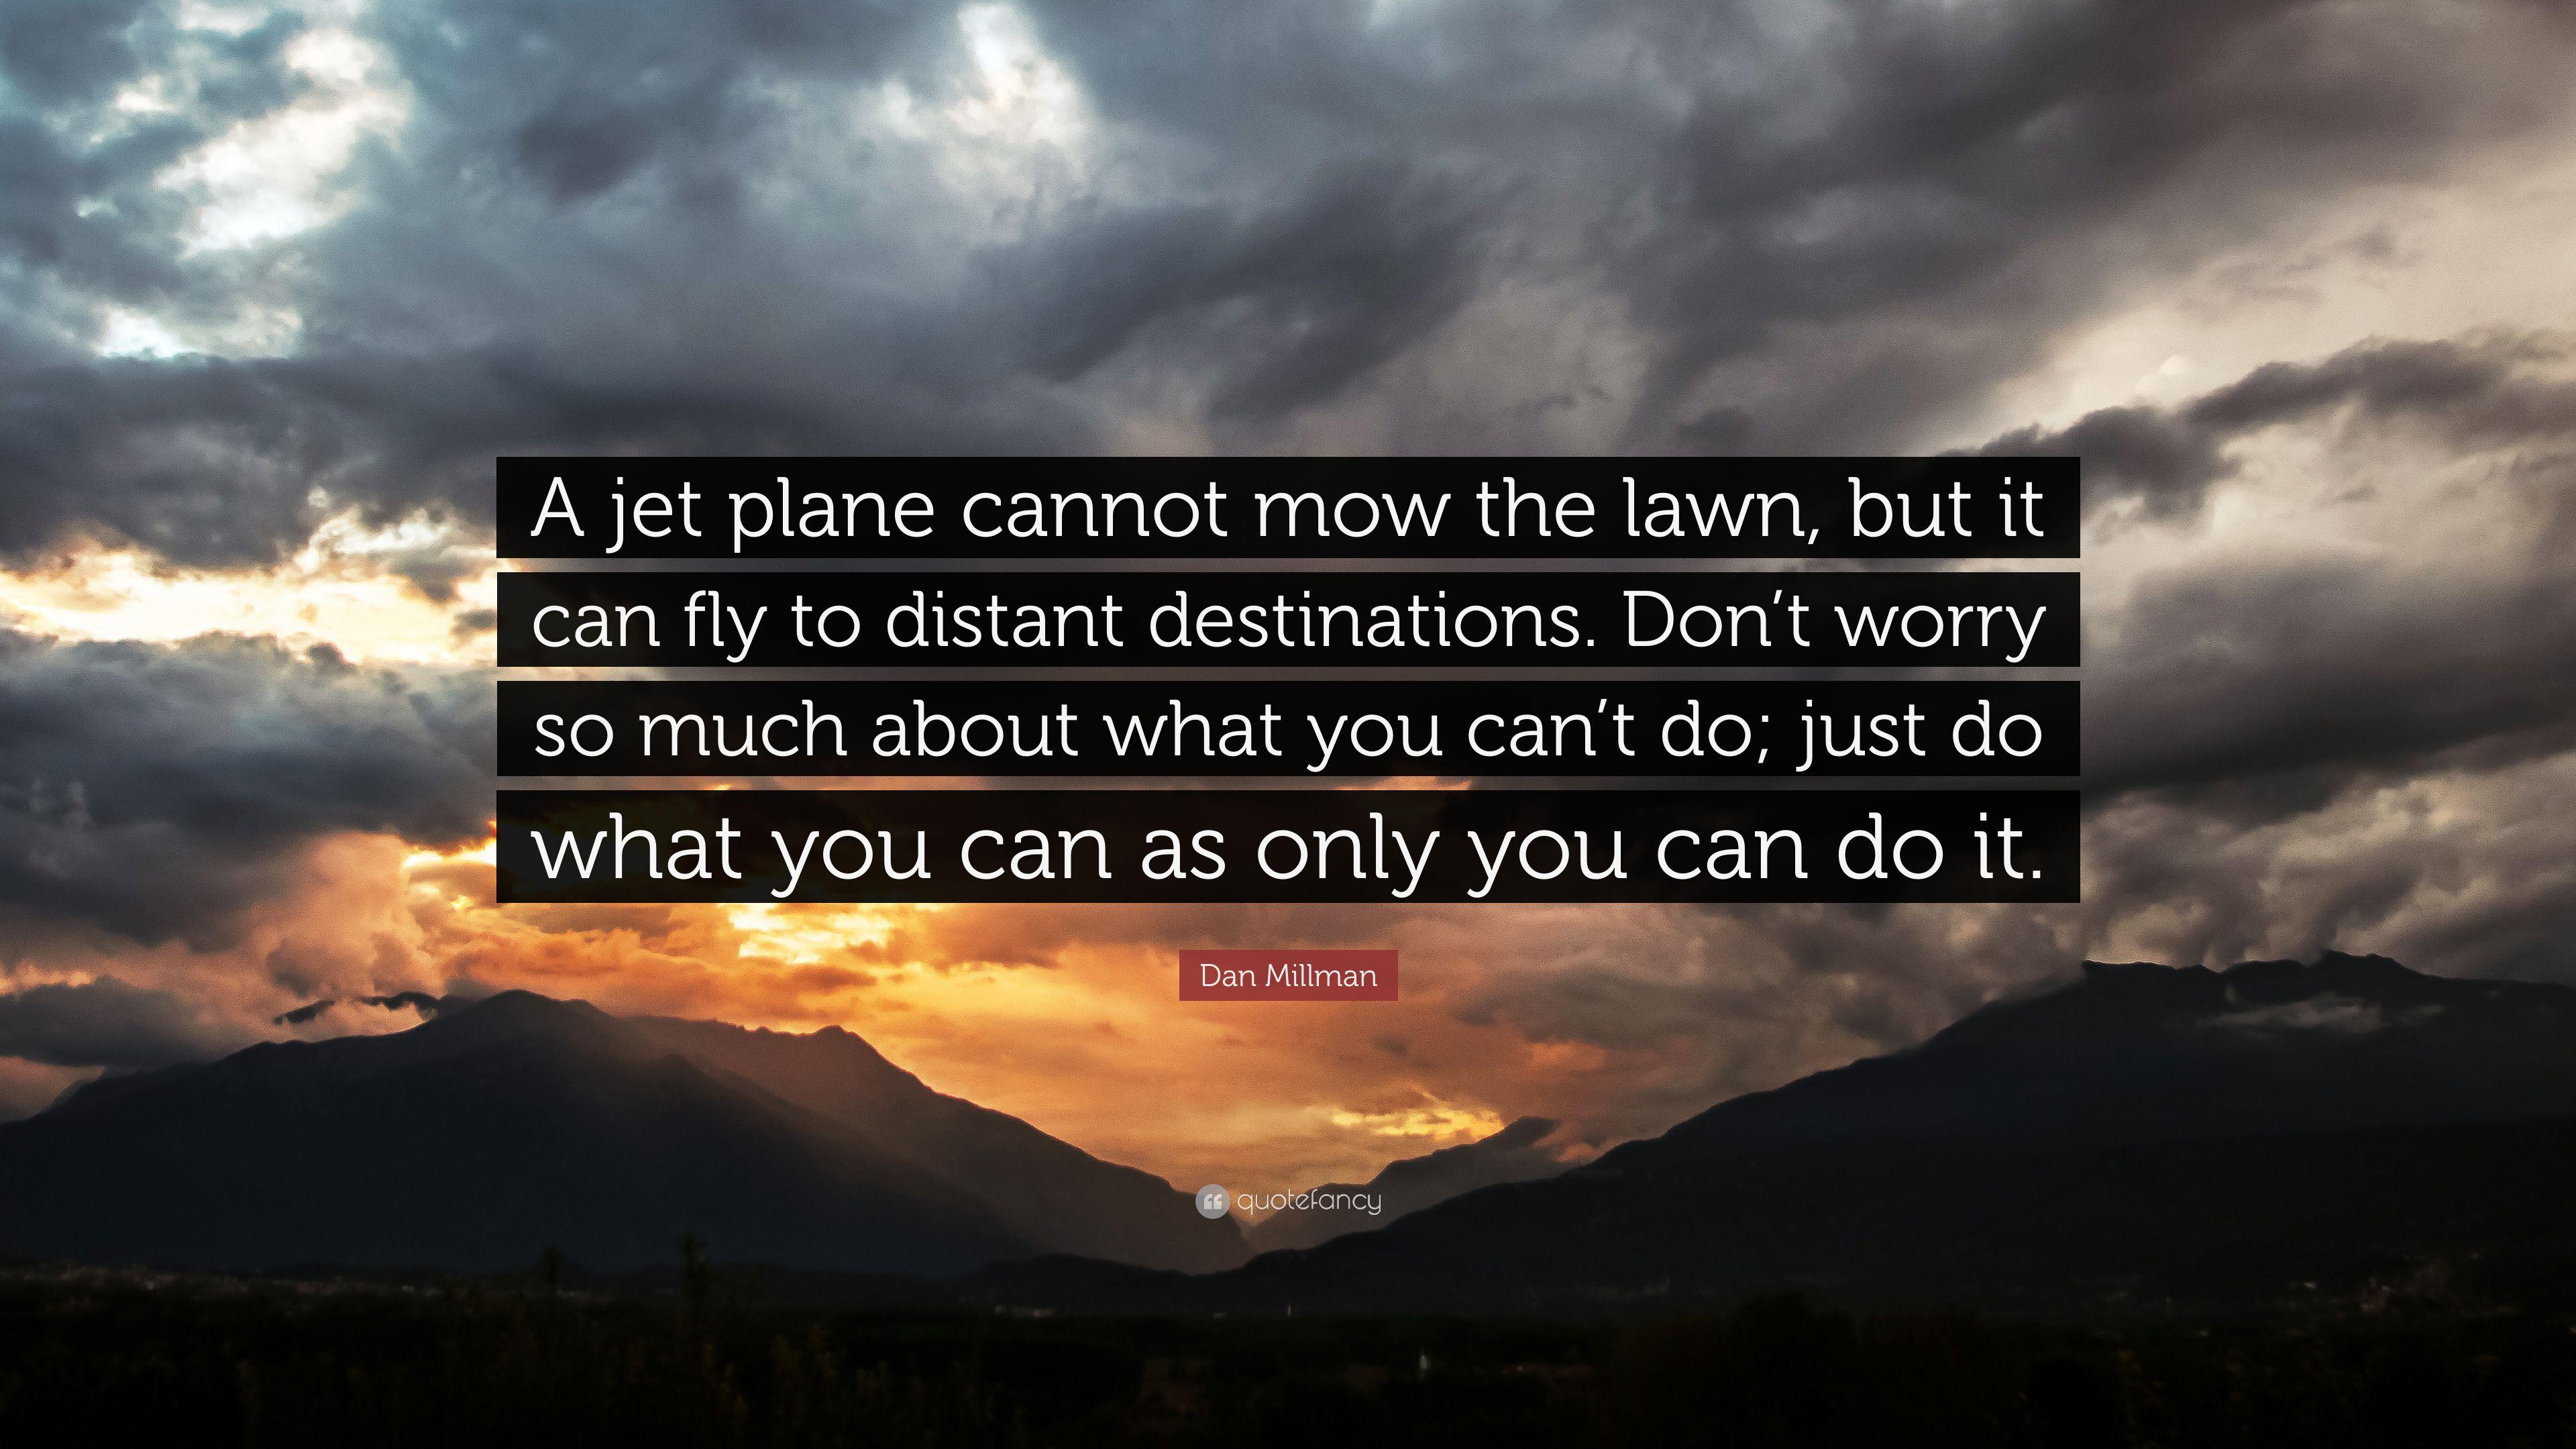 Dan Millman Quote: “A jet plane cannot mow the lawn, but it can fly